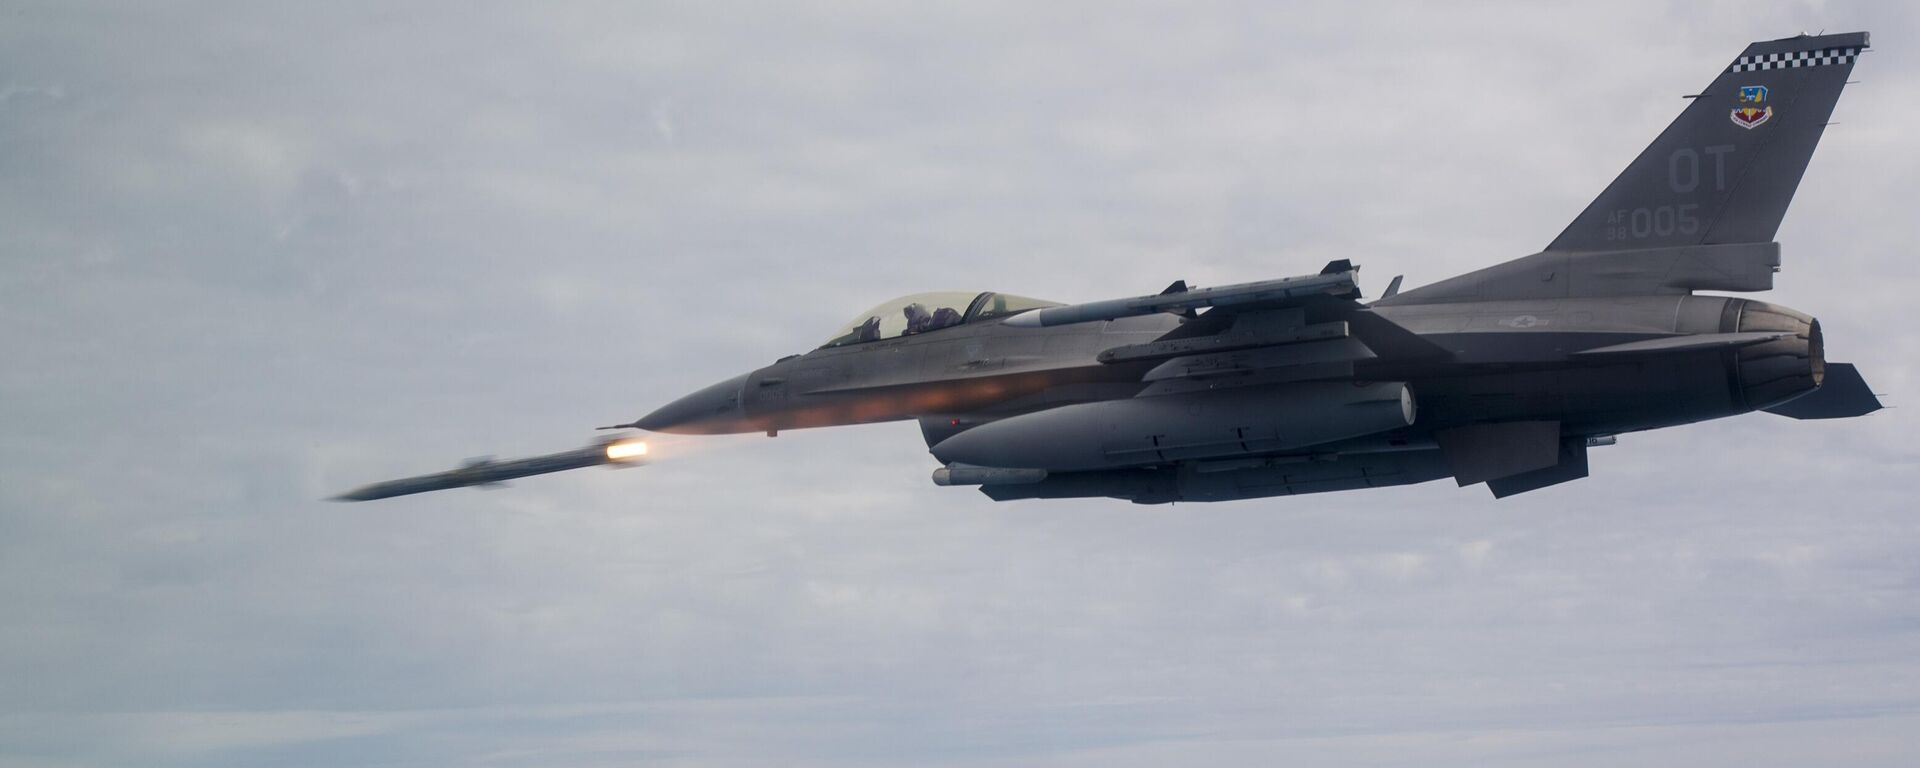 An F-16C Fighting Falcon assigned to the 85th Test Evaluation Squadron shoots an AIM-120 Advanced Medium-Range Air-to-Air Missile, or AMRAAM over testing ranges near Eglin Air Force Base, Fla., March 19, 2019. - Sputnik International, 1920, 15.06.2023